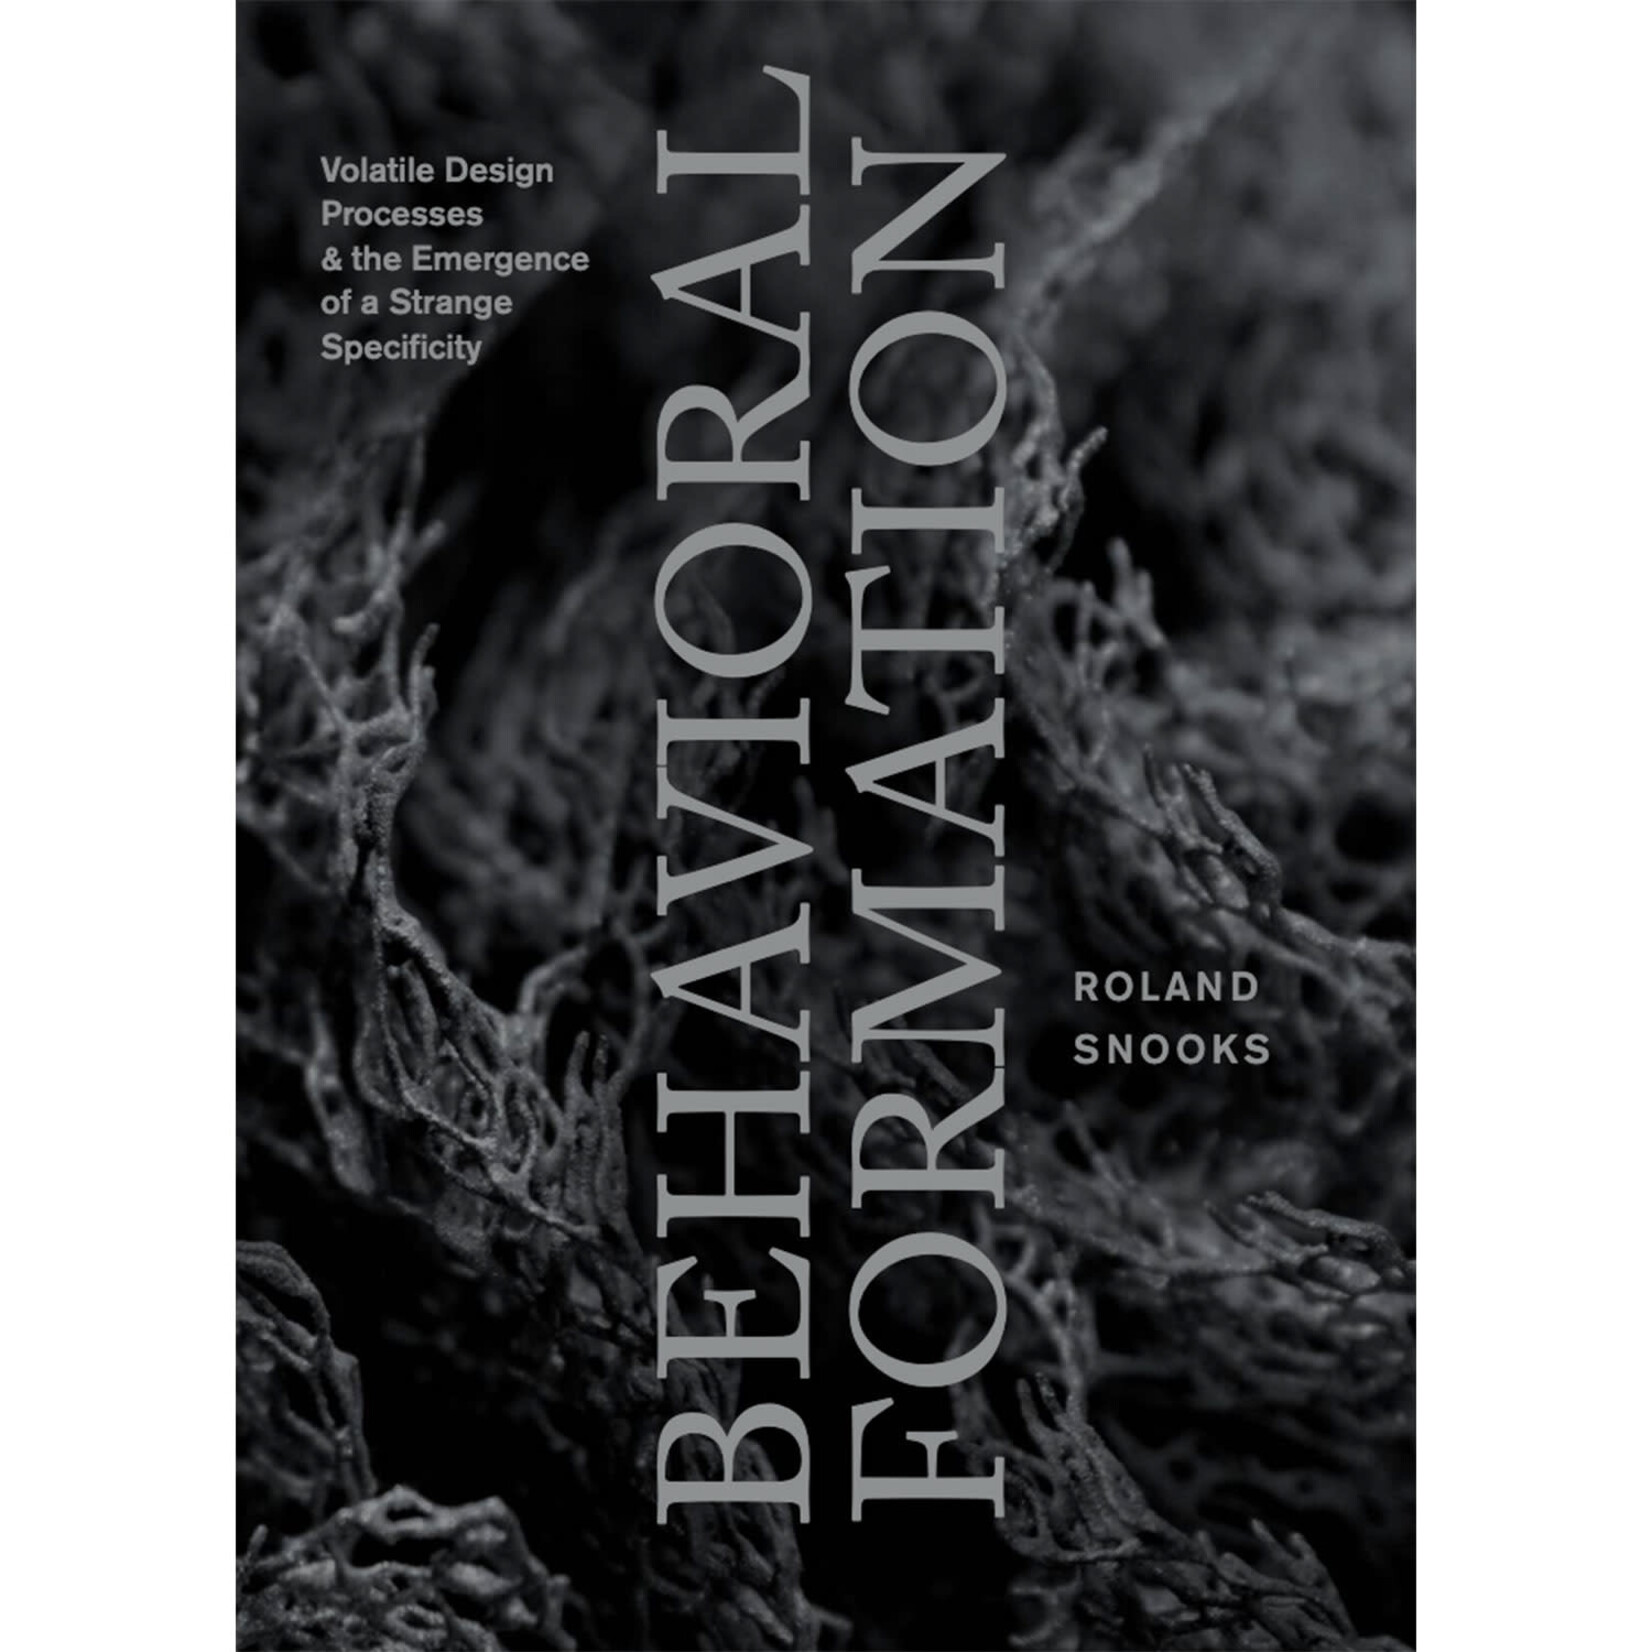 Behavioral Formation: Volatile Design Processes and the Emergence of a Strange Specificity